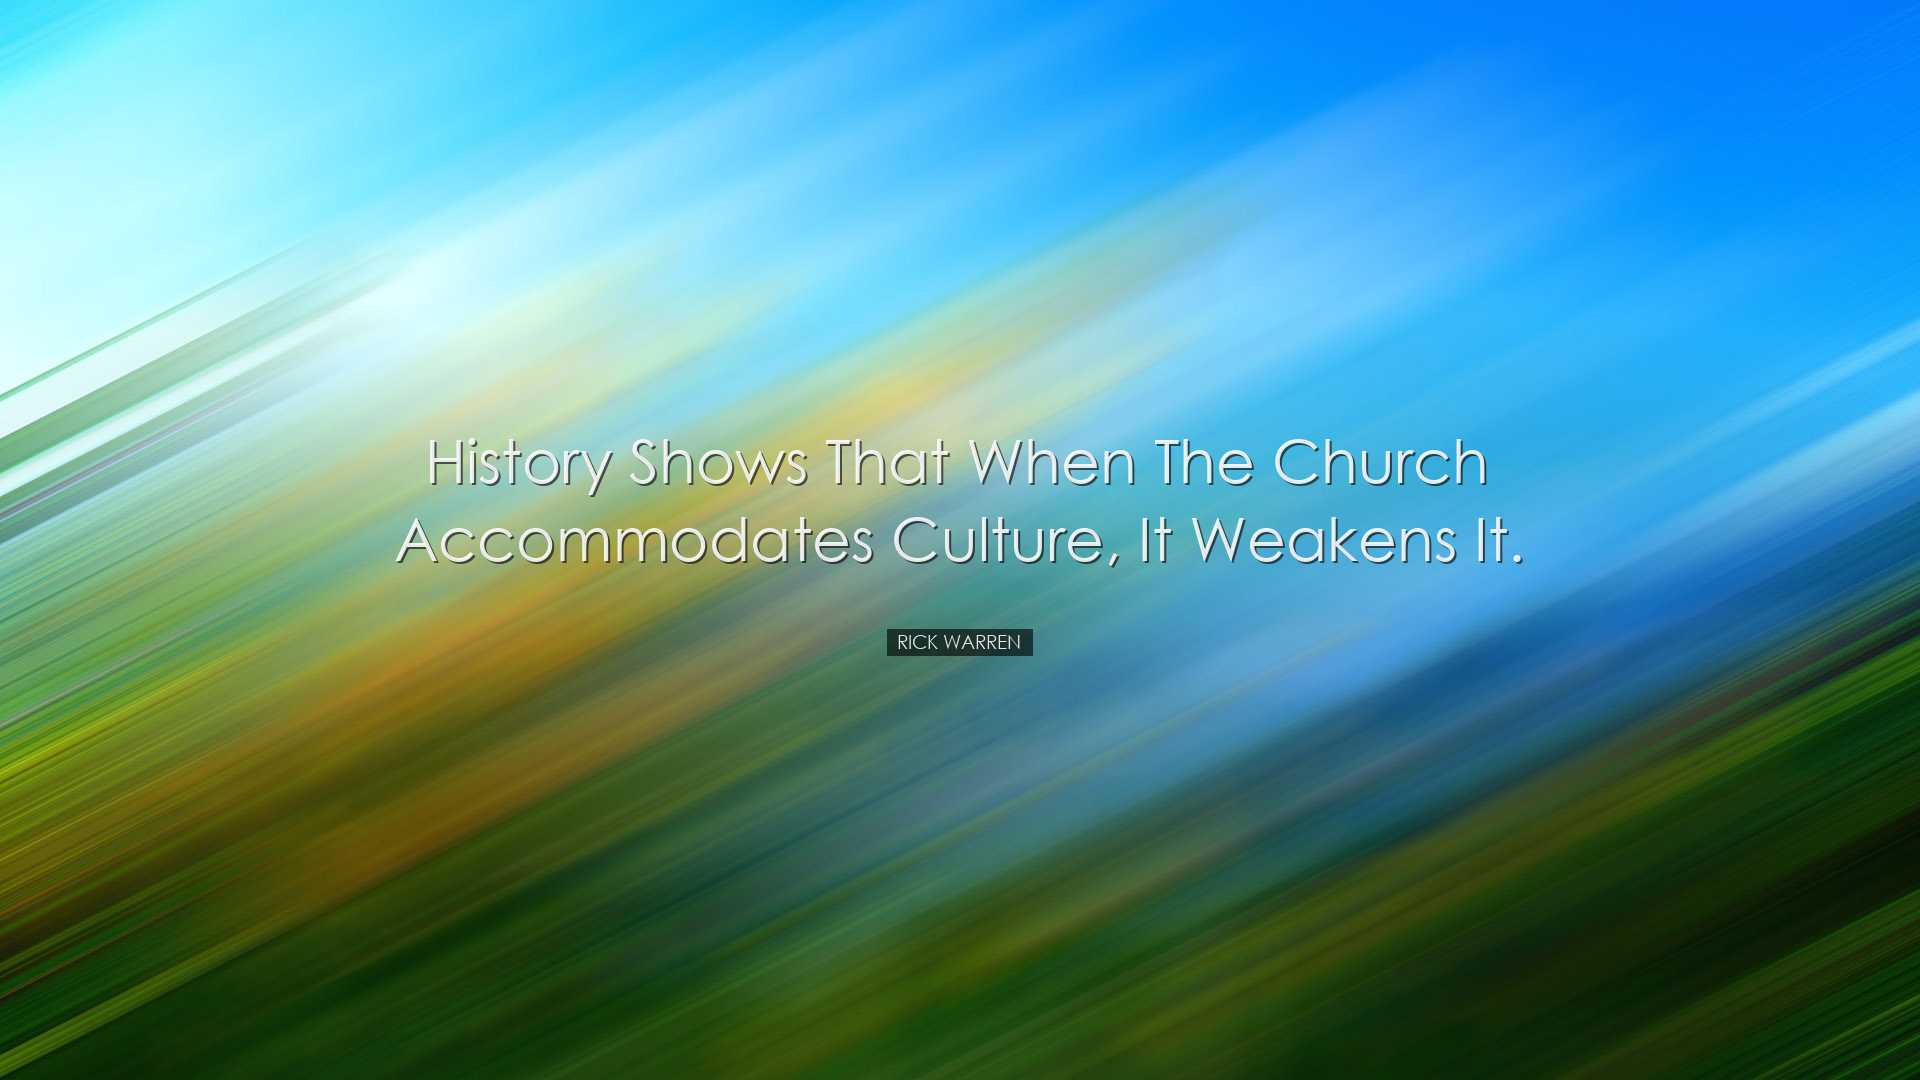 History shows that when the church accommodates culture, it weaken